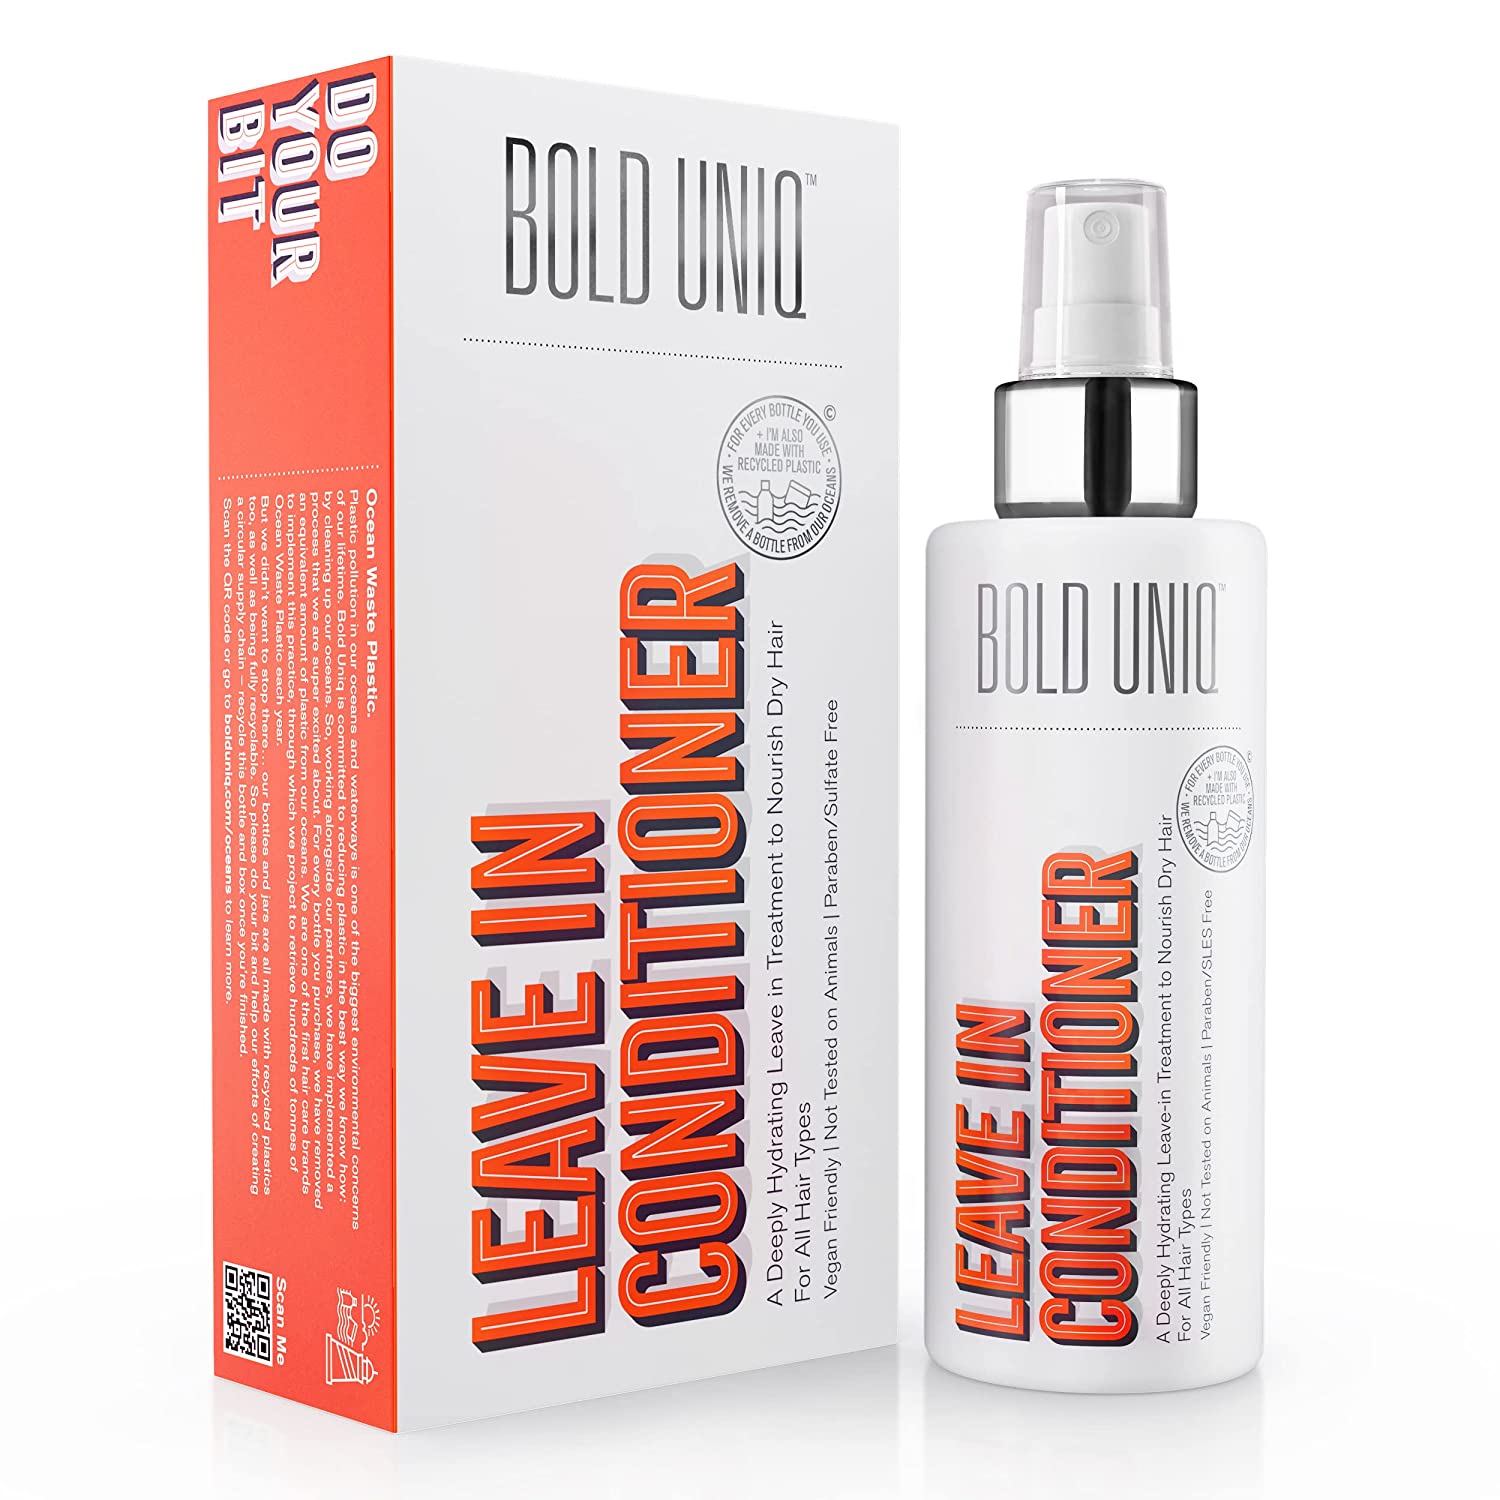 Bold Uniq Leave in Conditioner - Hair Care Spray Moisturises and Shine for Dry, Broken, Damaged, Coloured, Bleached Hair - Sulphate/Paraben Free - Fair & 100% Vegan